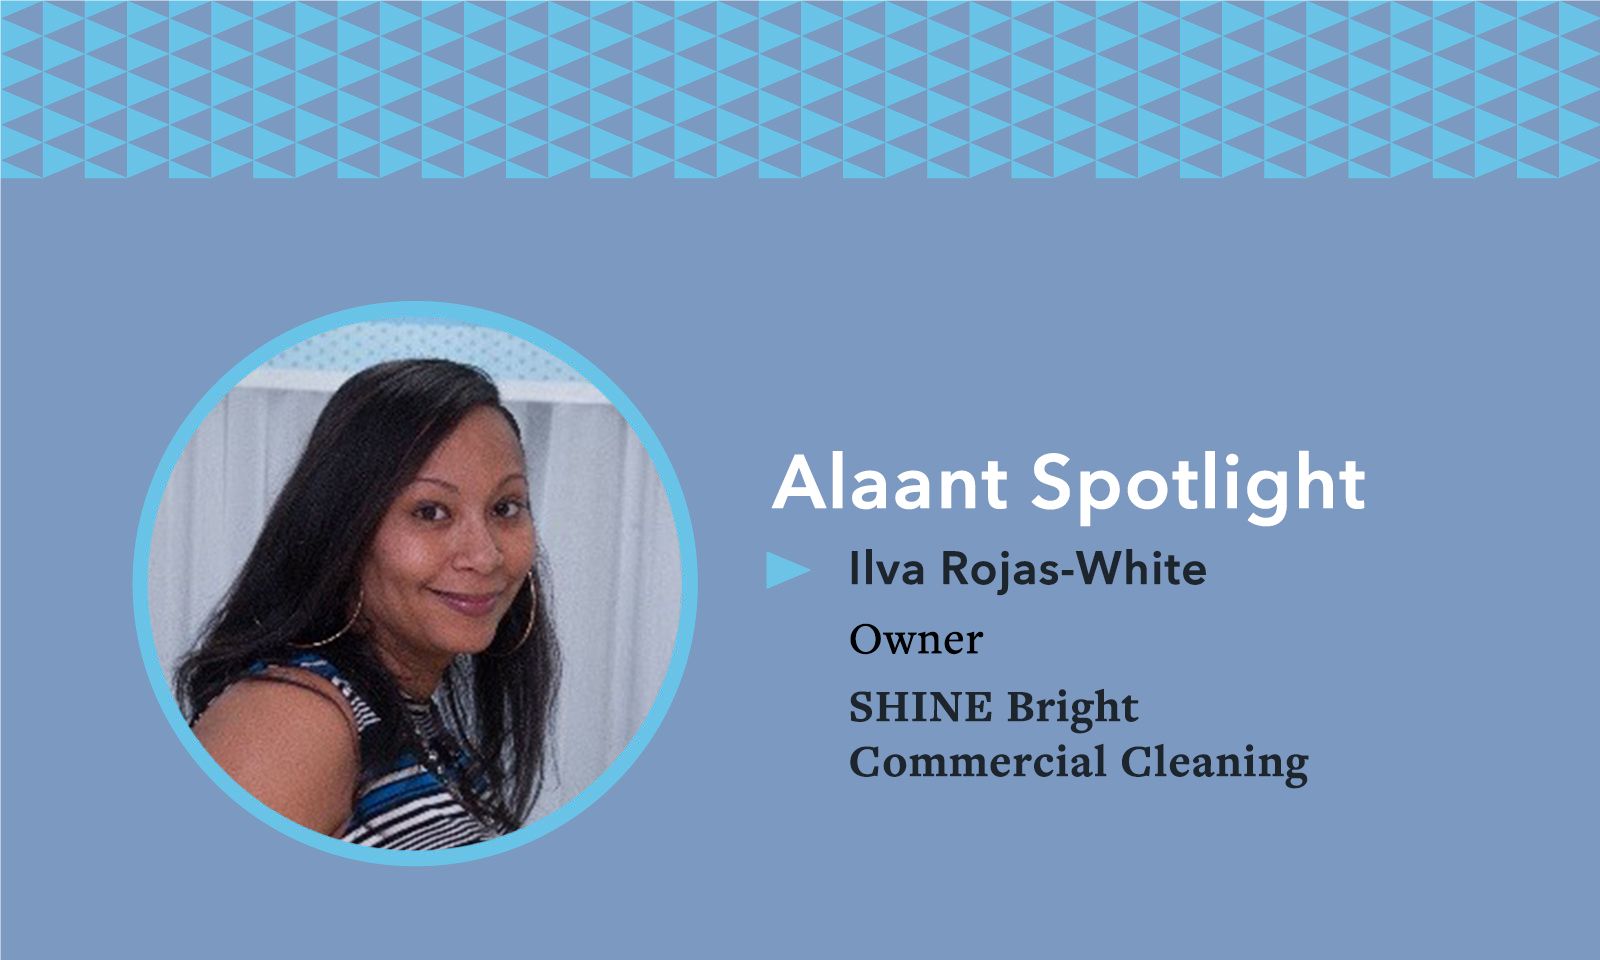 Alaant Spotlight Ilva Rojas-White Owner SHINE Bright Commercial Cleaning